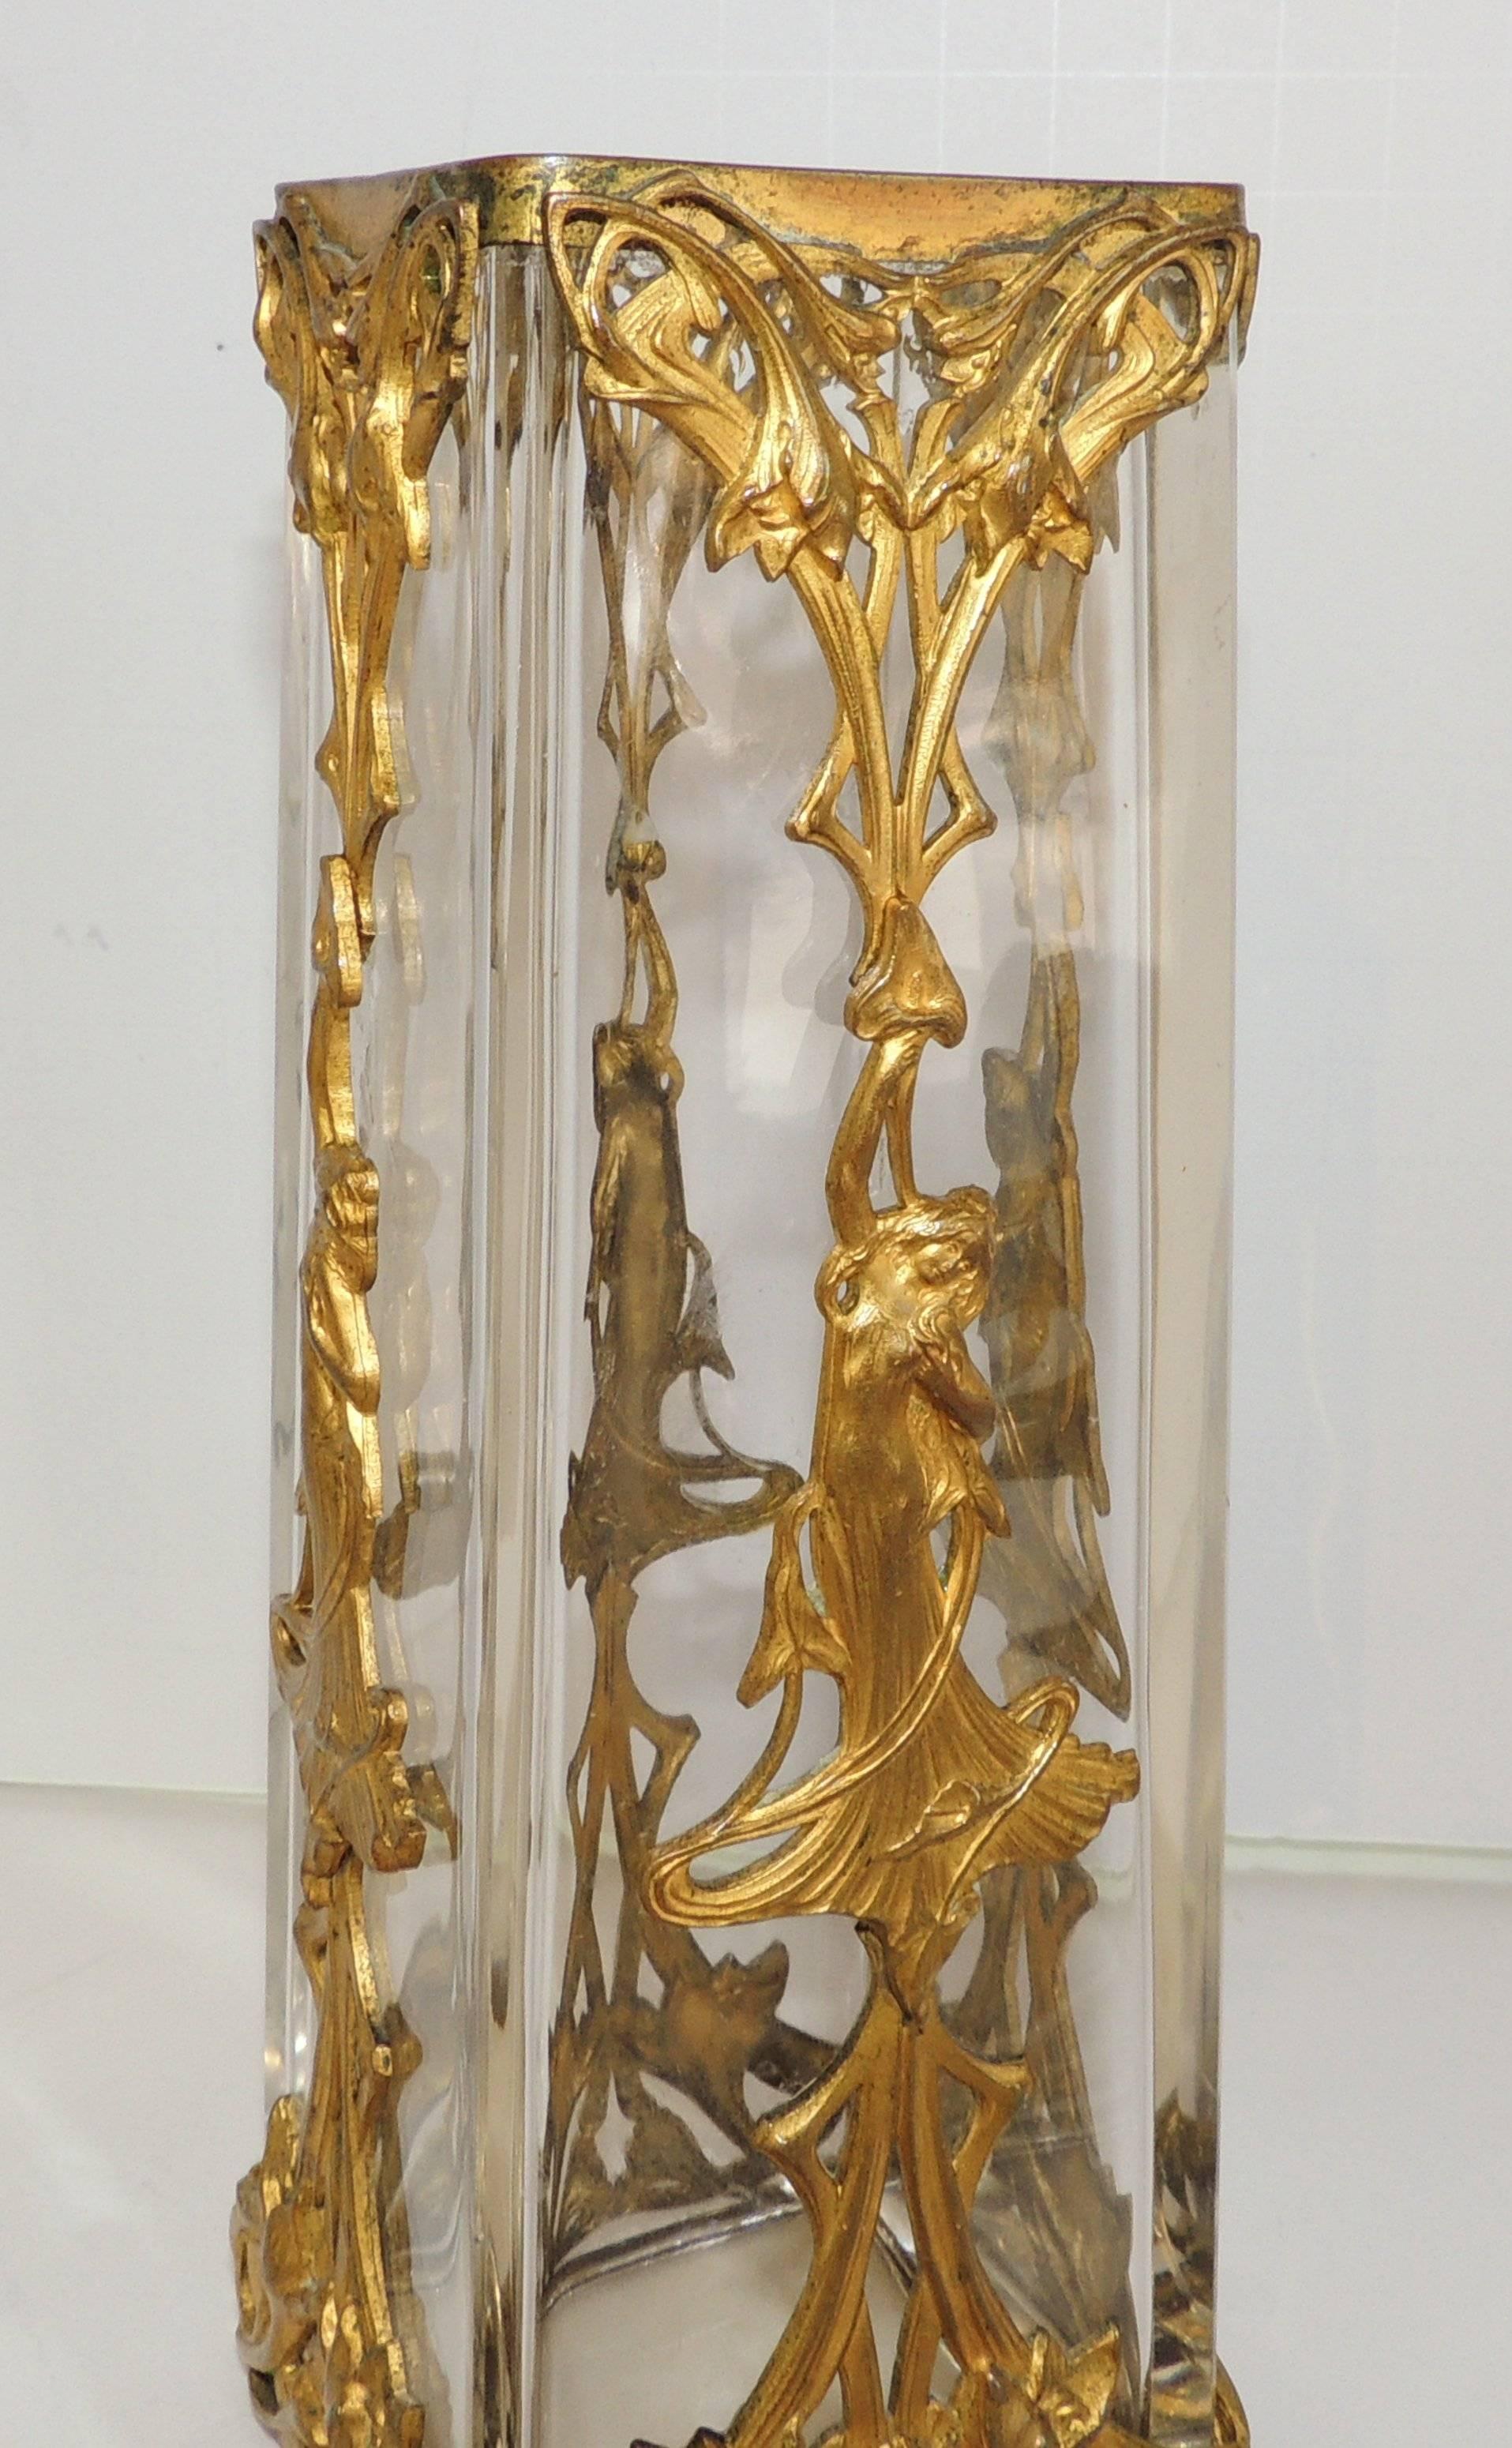 Wonderful French Lady Figure Art Nouveau Ormolu-Mounted Gilt Bronze Crystal Vase In Good Condition For Sale In Roslyn, NY